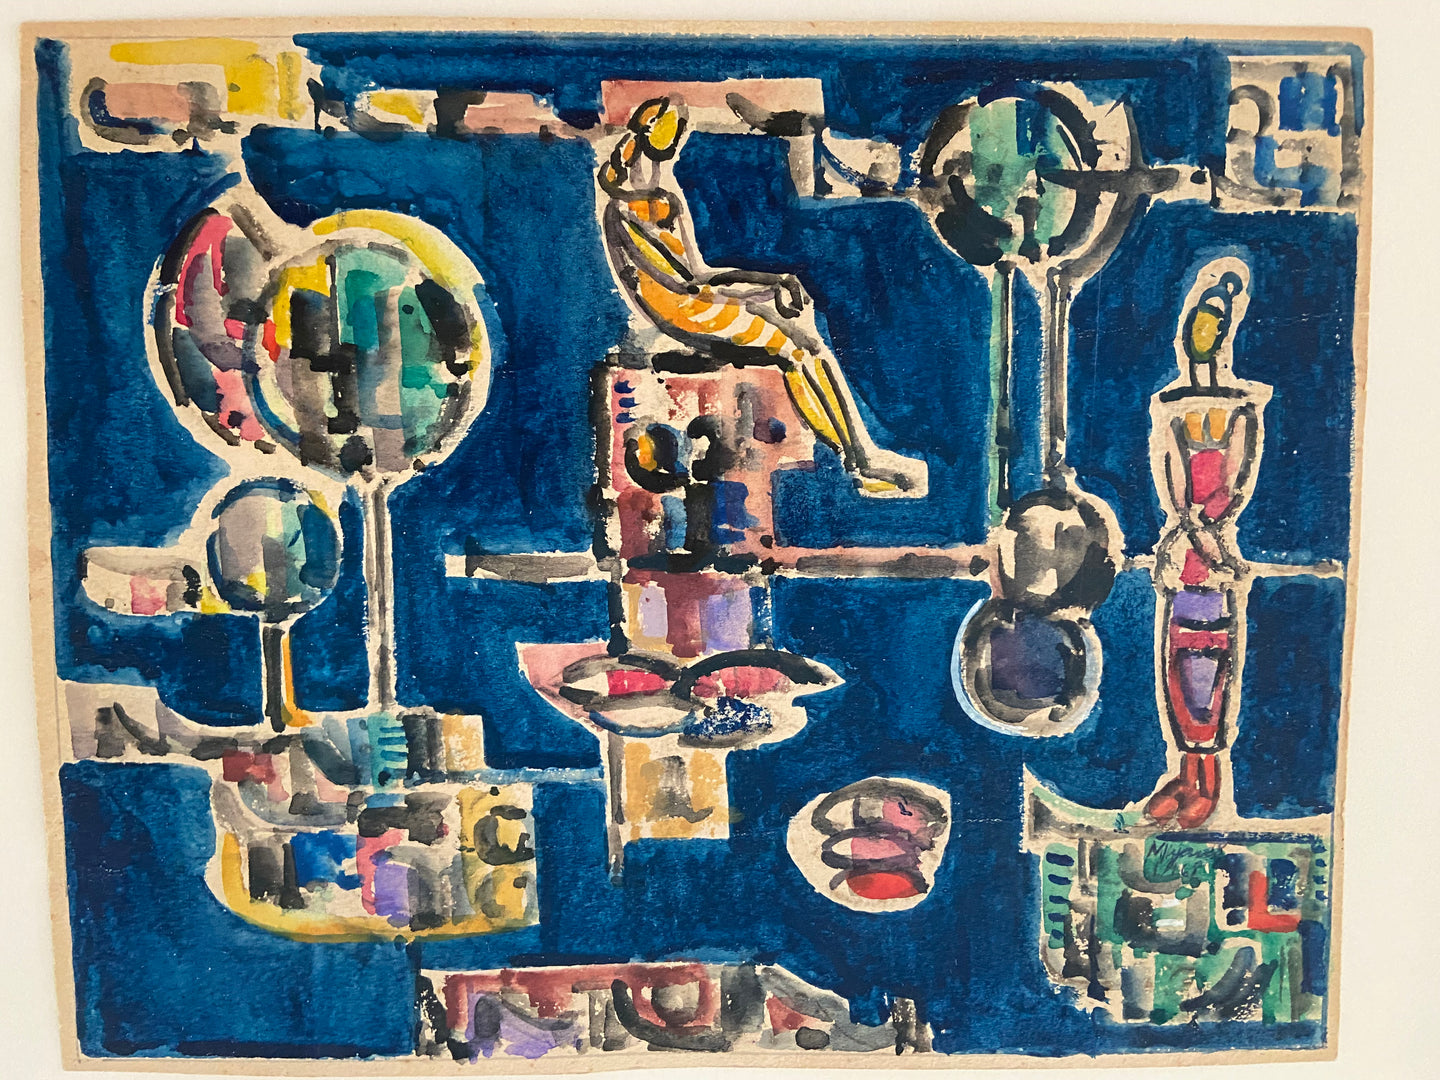 Cuban artist Jose Mijares' Interior  Watercolor on paper  8 ¾” x 11 “  17 ¼ “ x 19” with Frame  1968